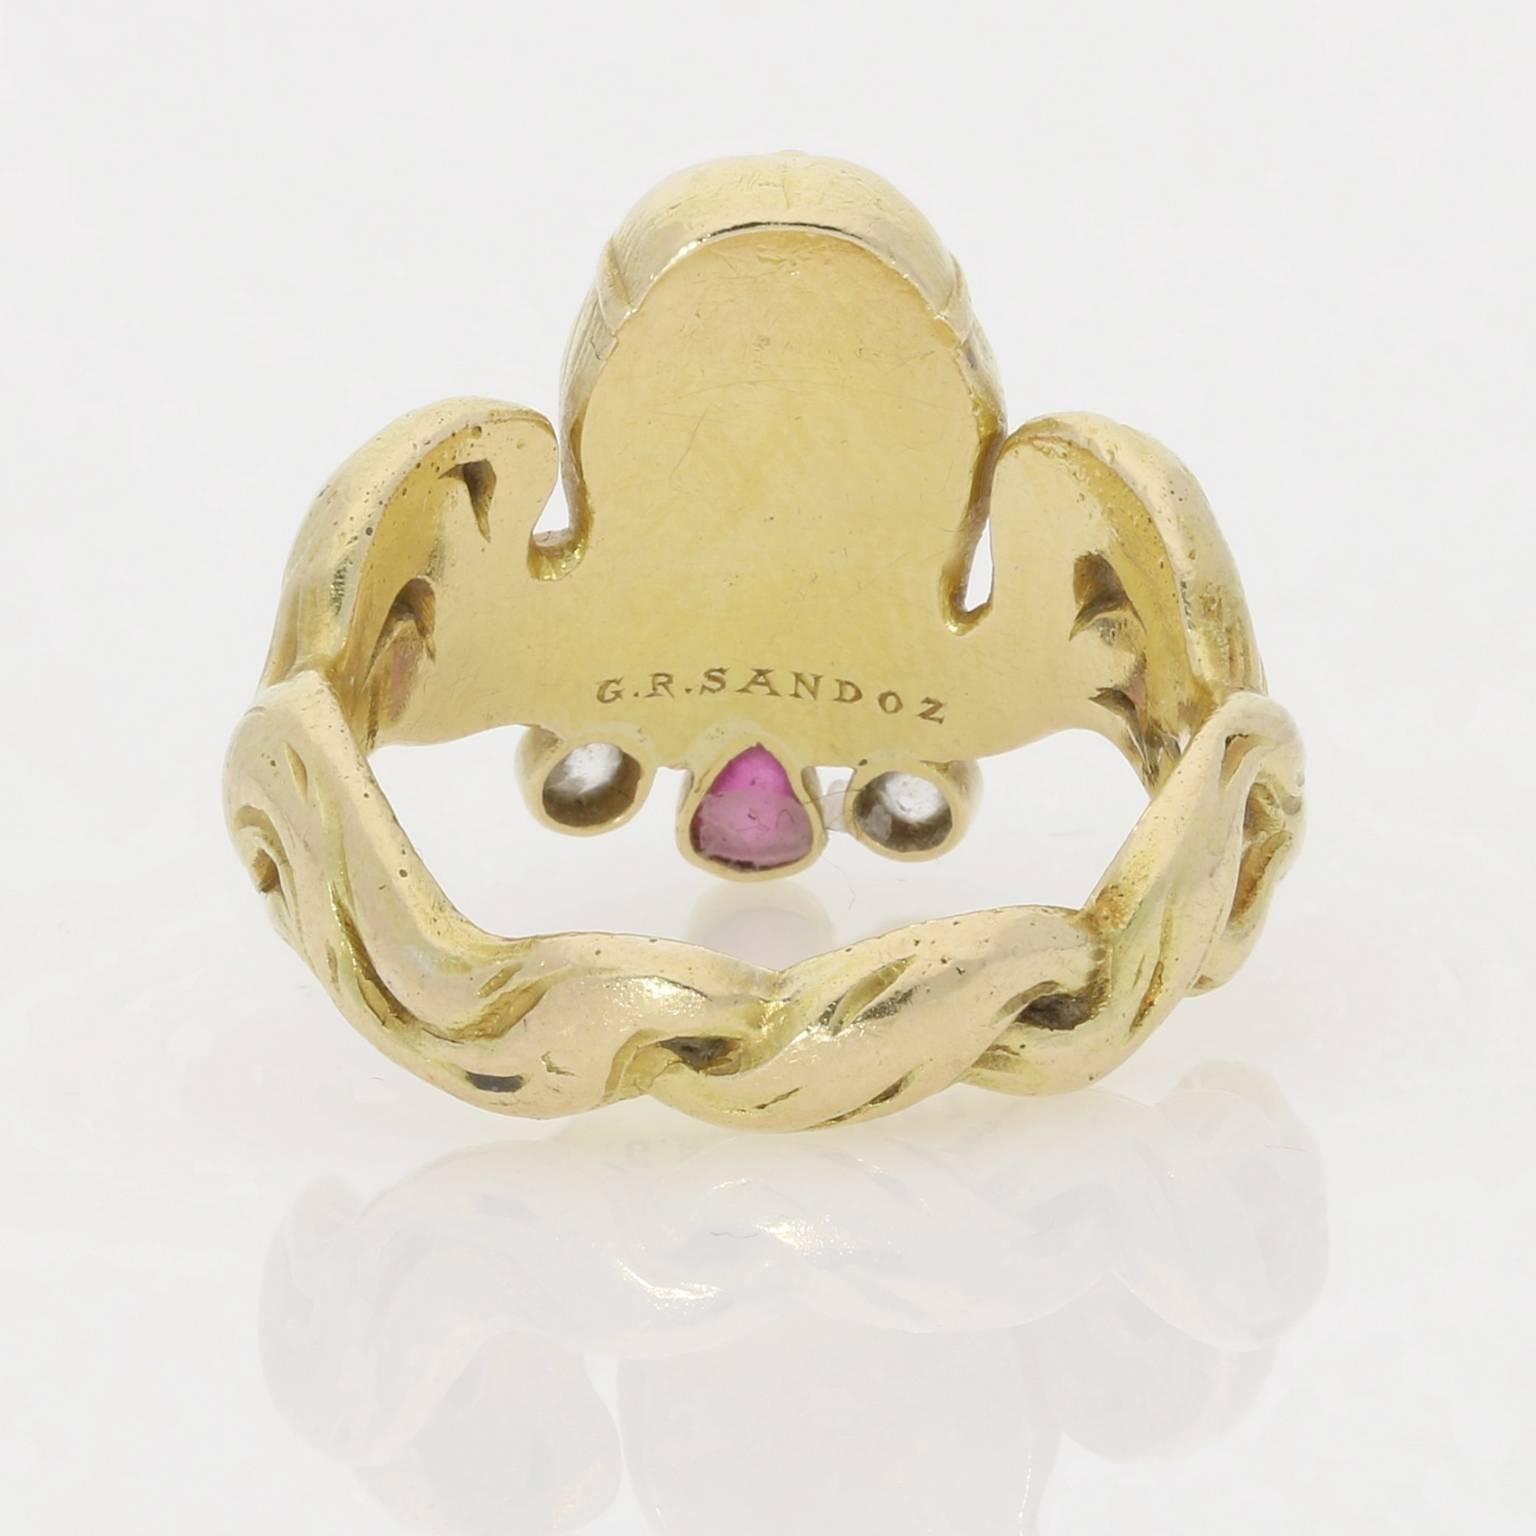 Women's or Men's Art Nouveau Gold, Ruby And Diamond Ring By Sandoz, c.1900